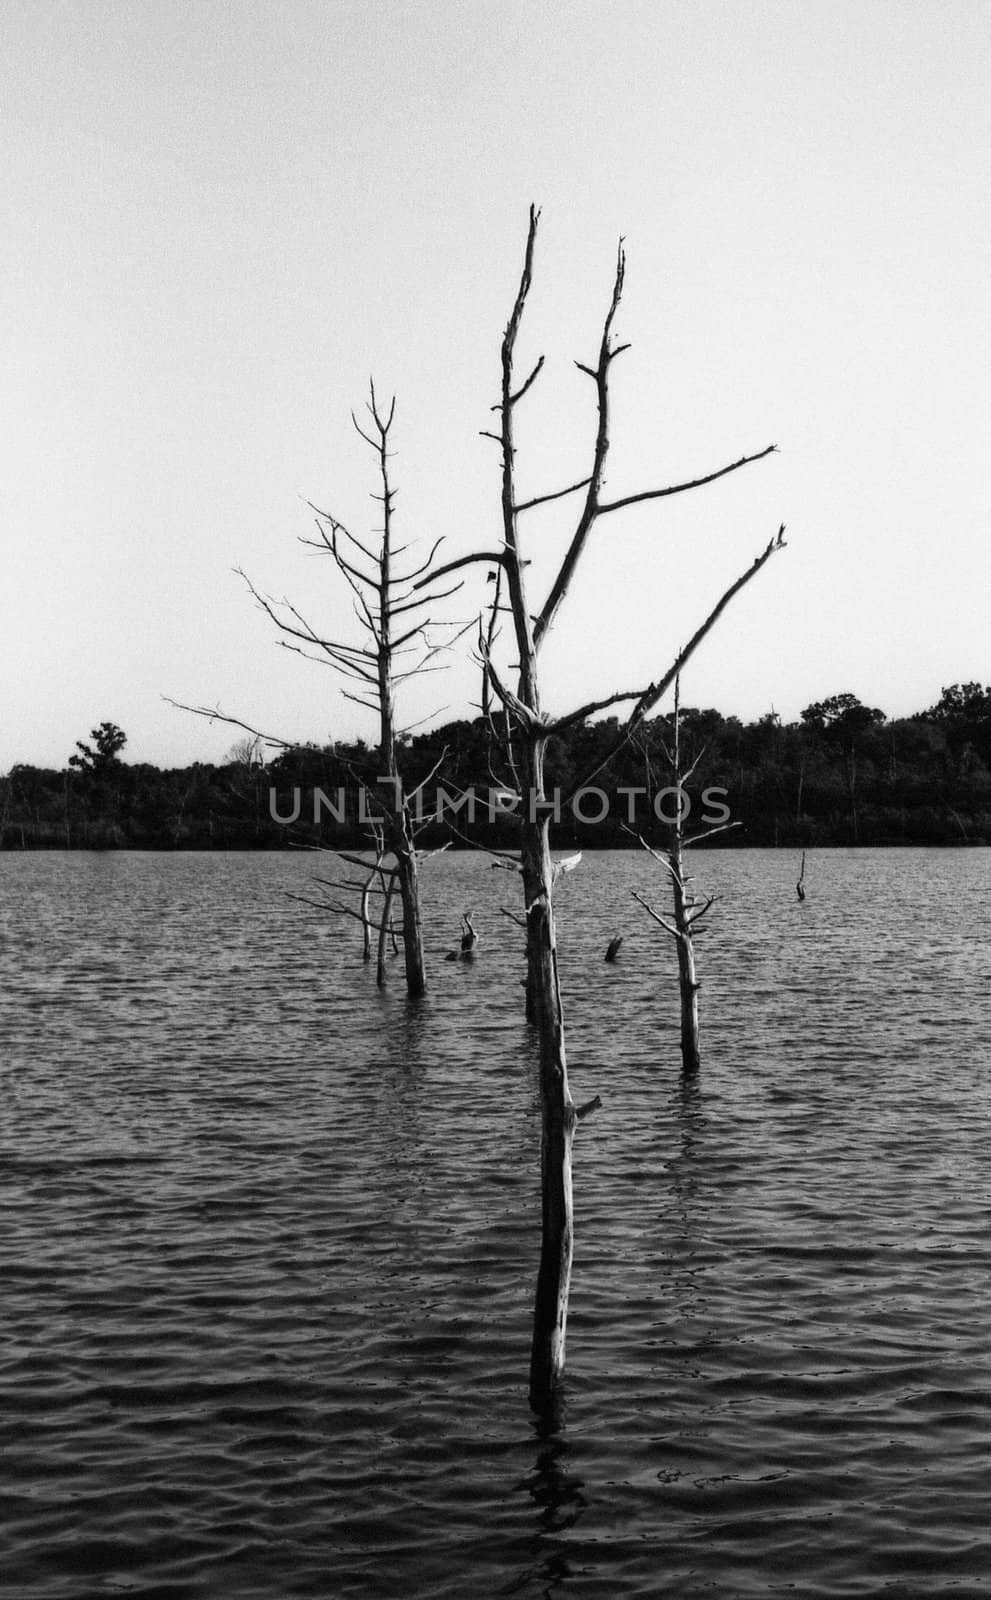 Three dead trees in flooded area